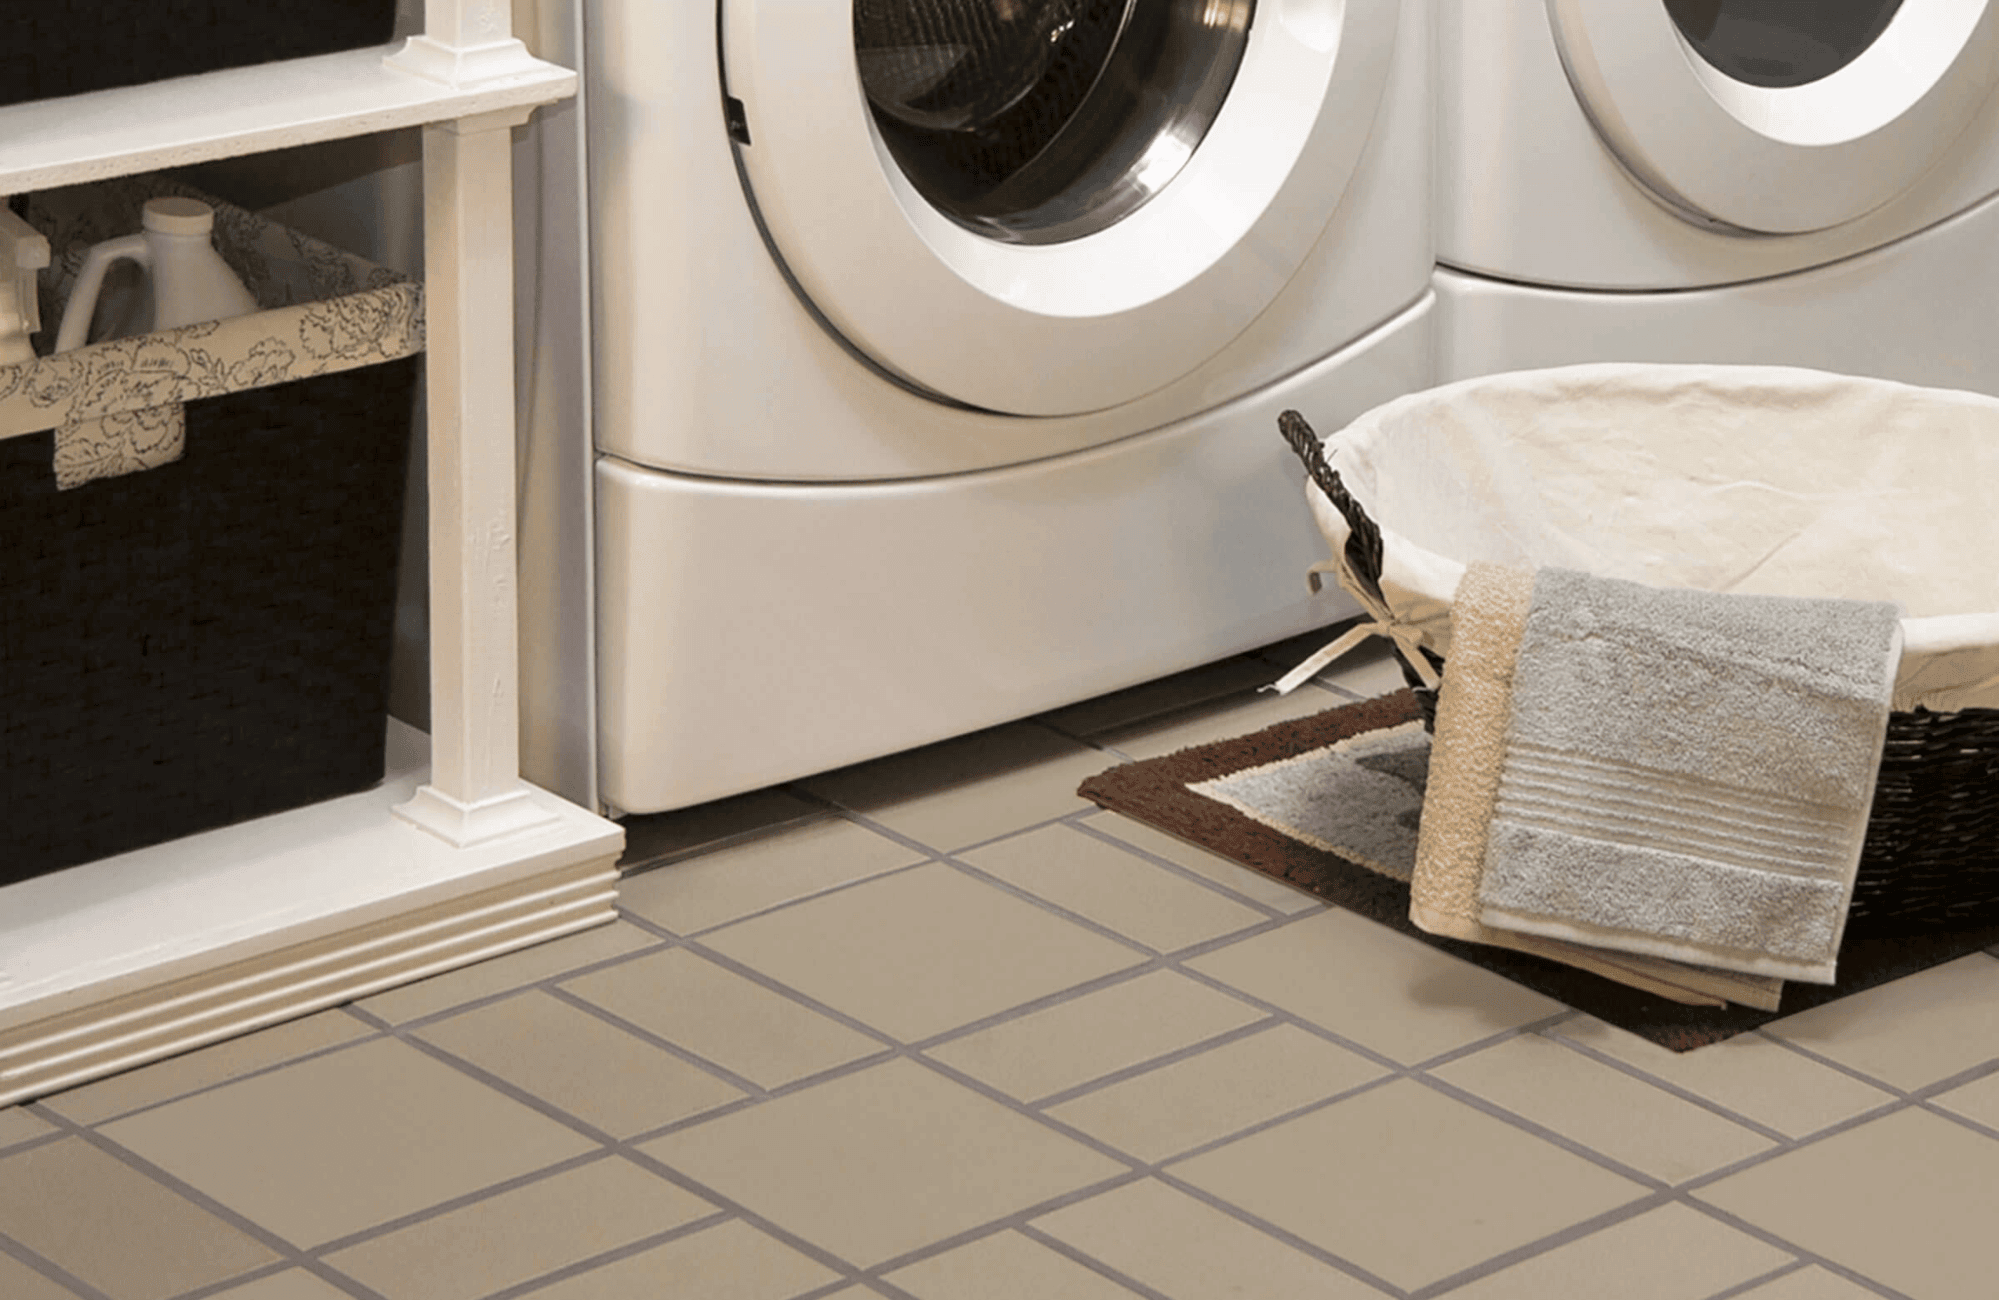 Laundry room with vertical crosshatch floor tile pattern and checkerboard 2.0 tile pattern